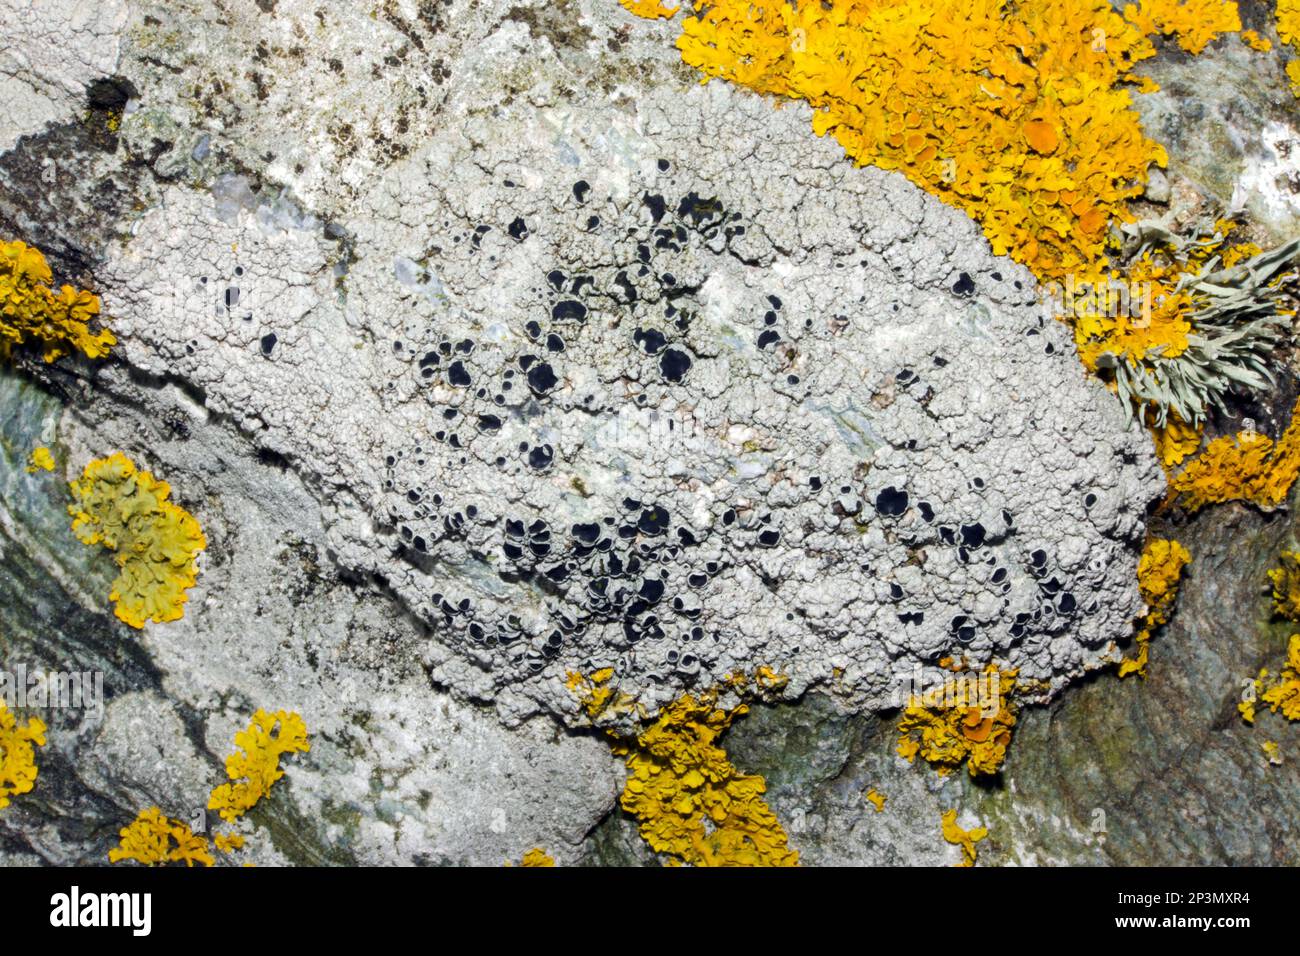 The common lichen Tephromela atra is found on exposed rocks (both siliceous and slightly basic) and is often dominant on coastal rocks. Stock Photo